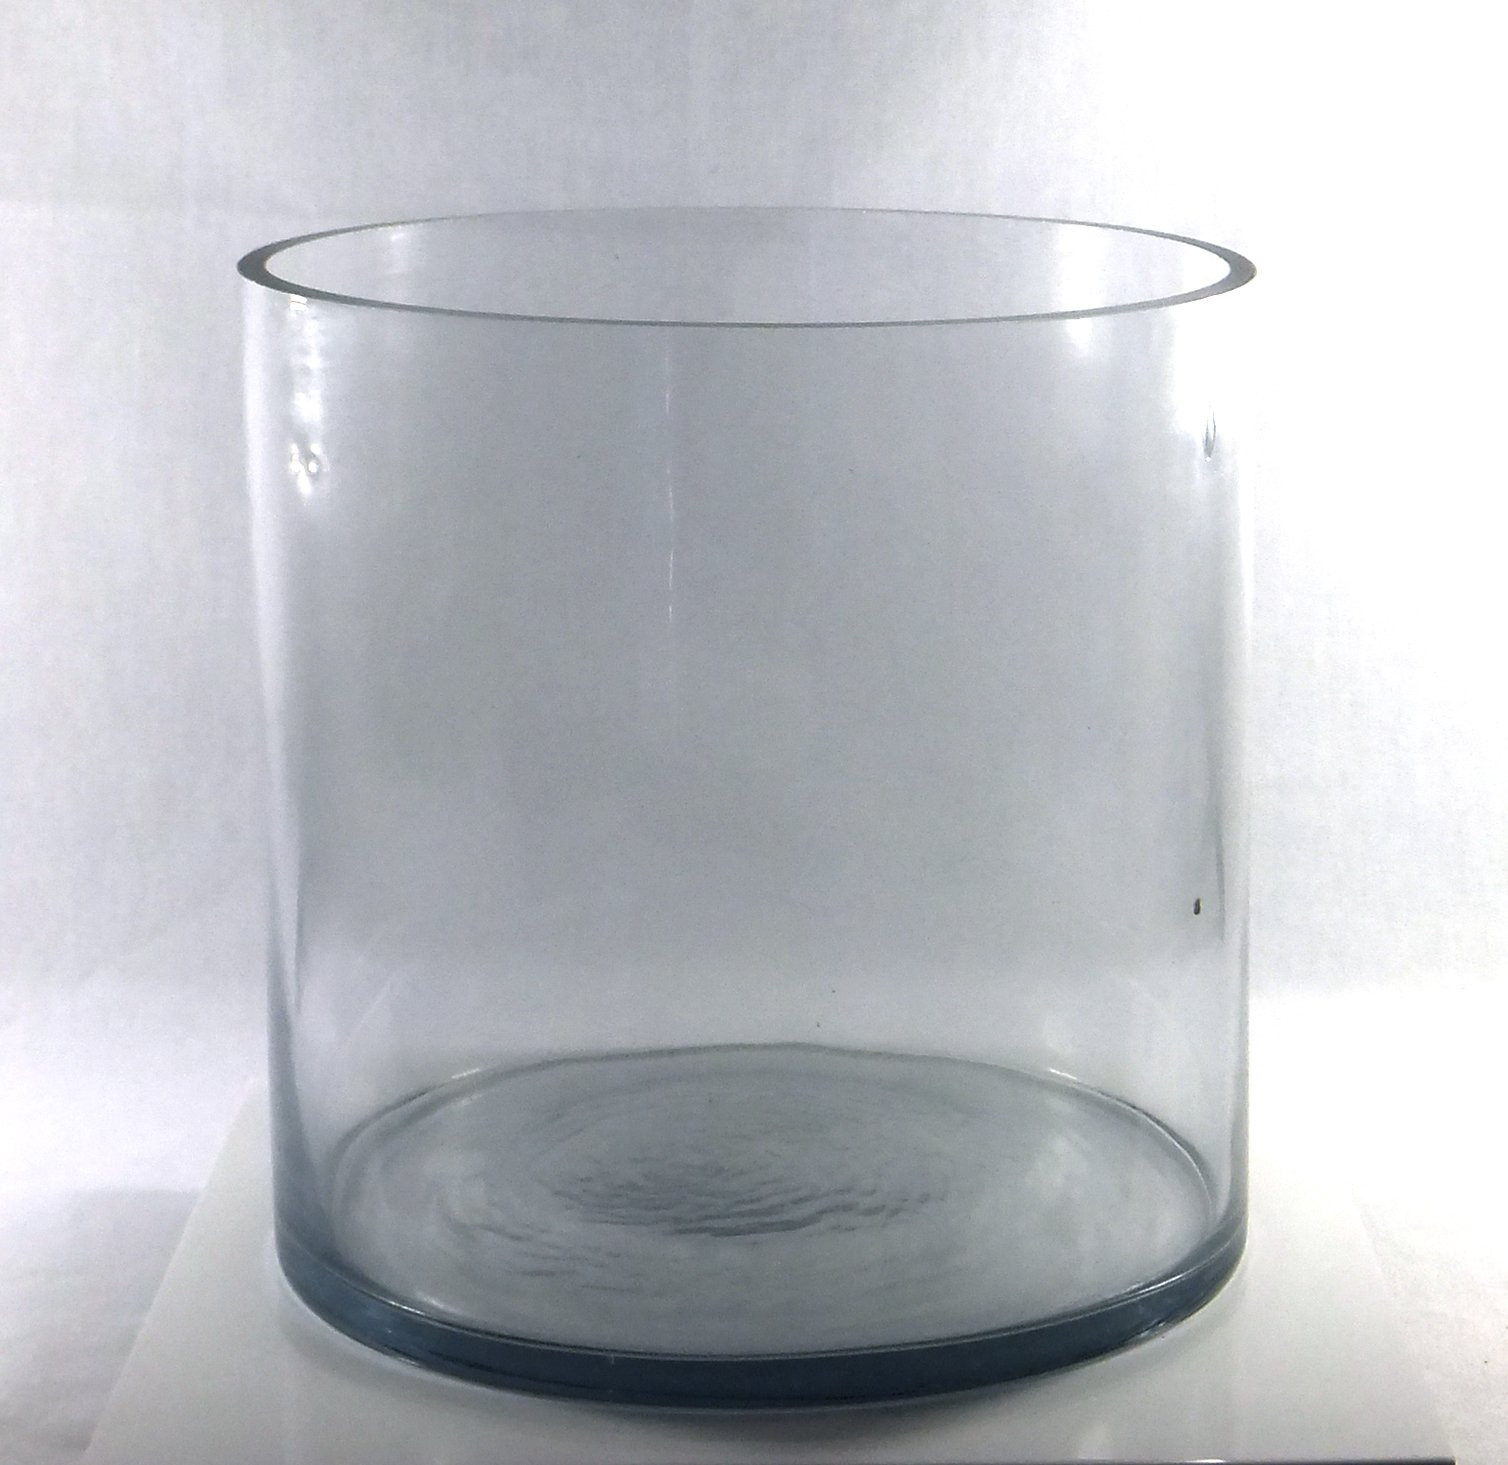 20 Wonderful Clear Glass Cube Vase 2024 free download clear glass cube vase of buy 8 inch round large glass vase 8 clear cylinder oversize throughout 8 inch round large glass vase 8 clear cylinder oversize centerpiece 8x8